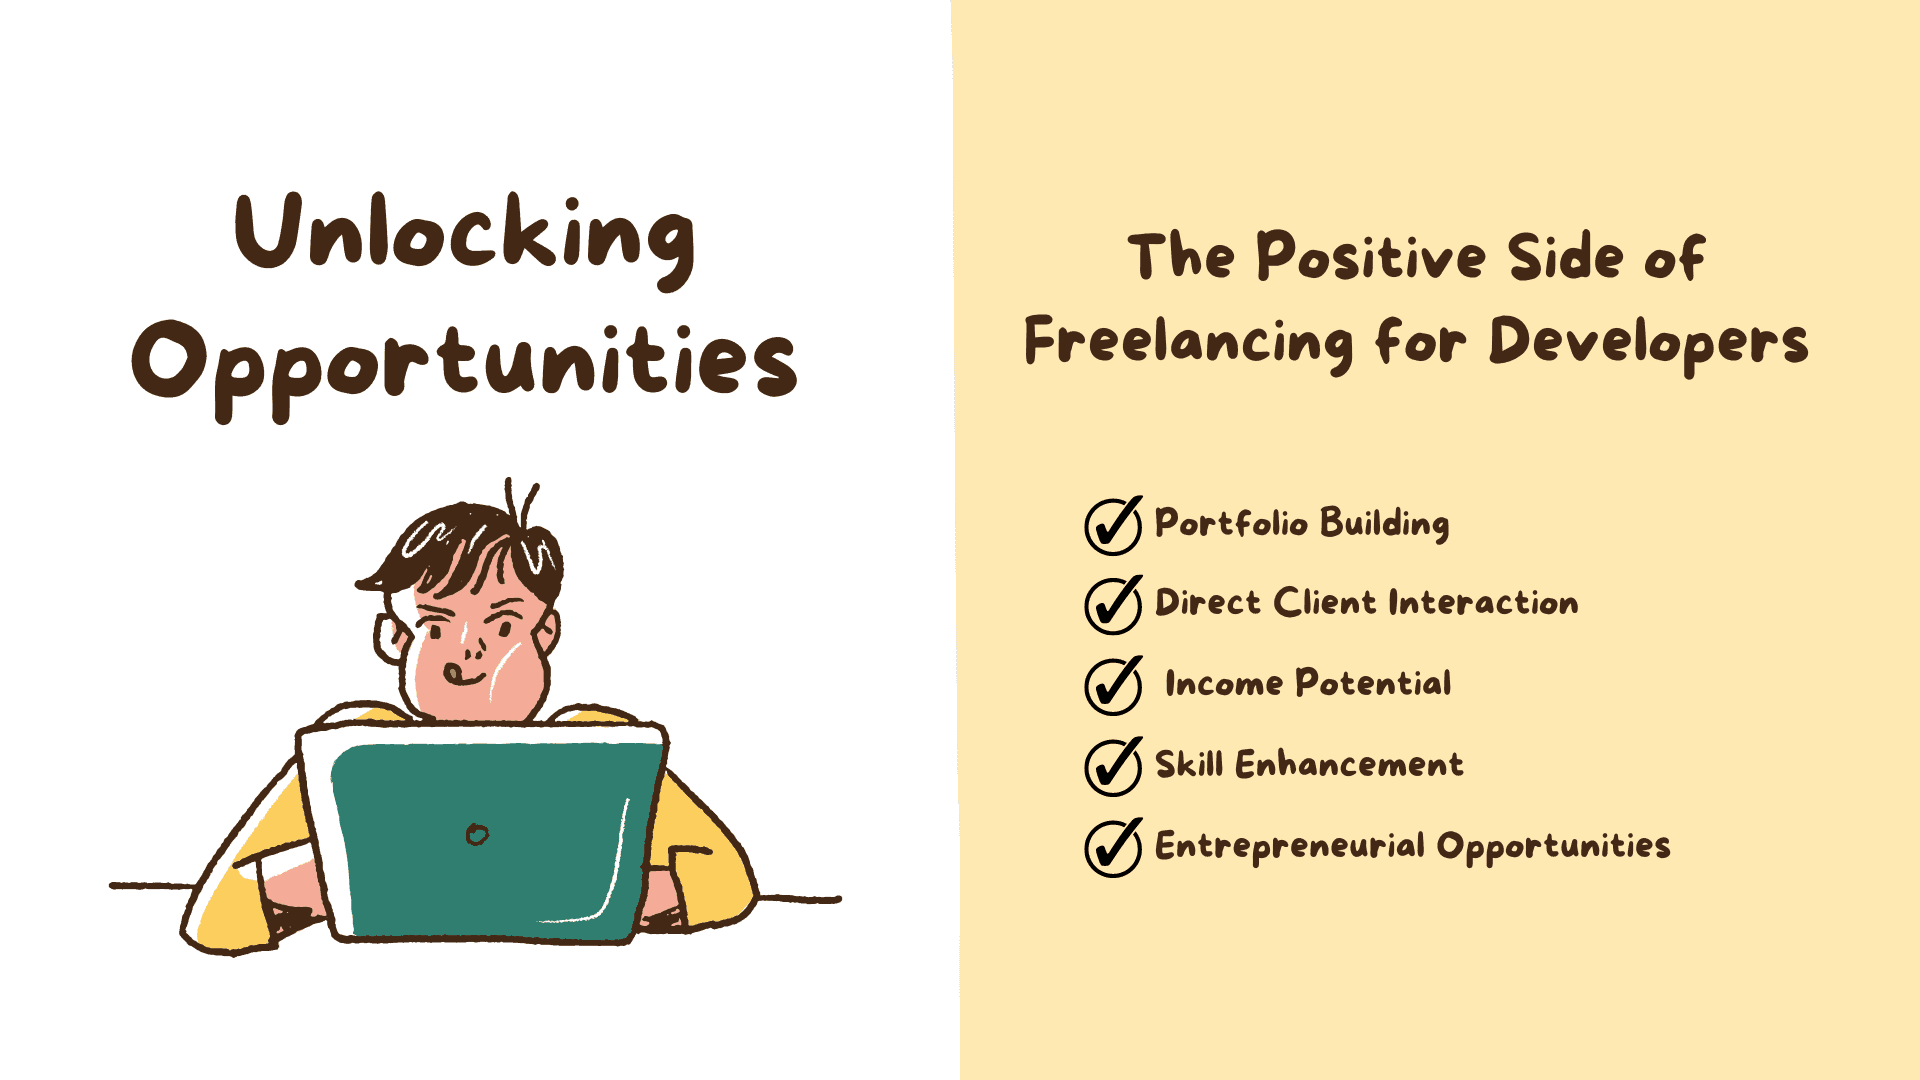 Unlocking Opportunities: The Positive Side of Freelancing for Developers